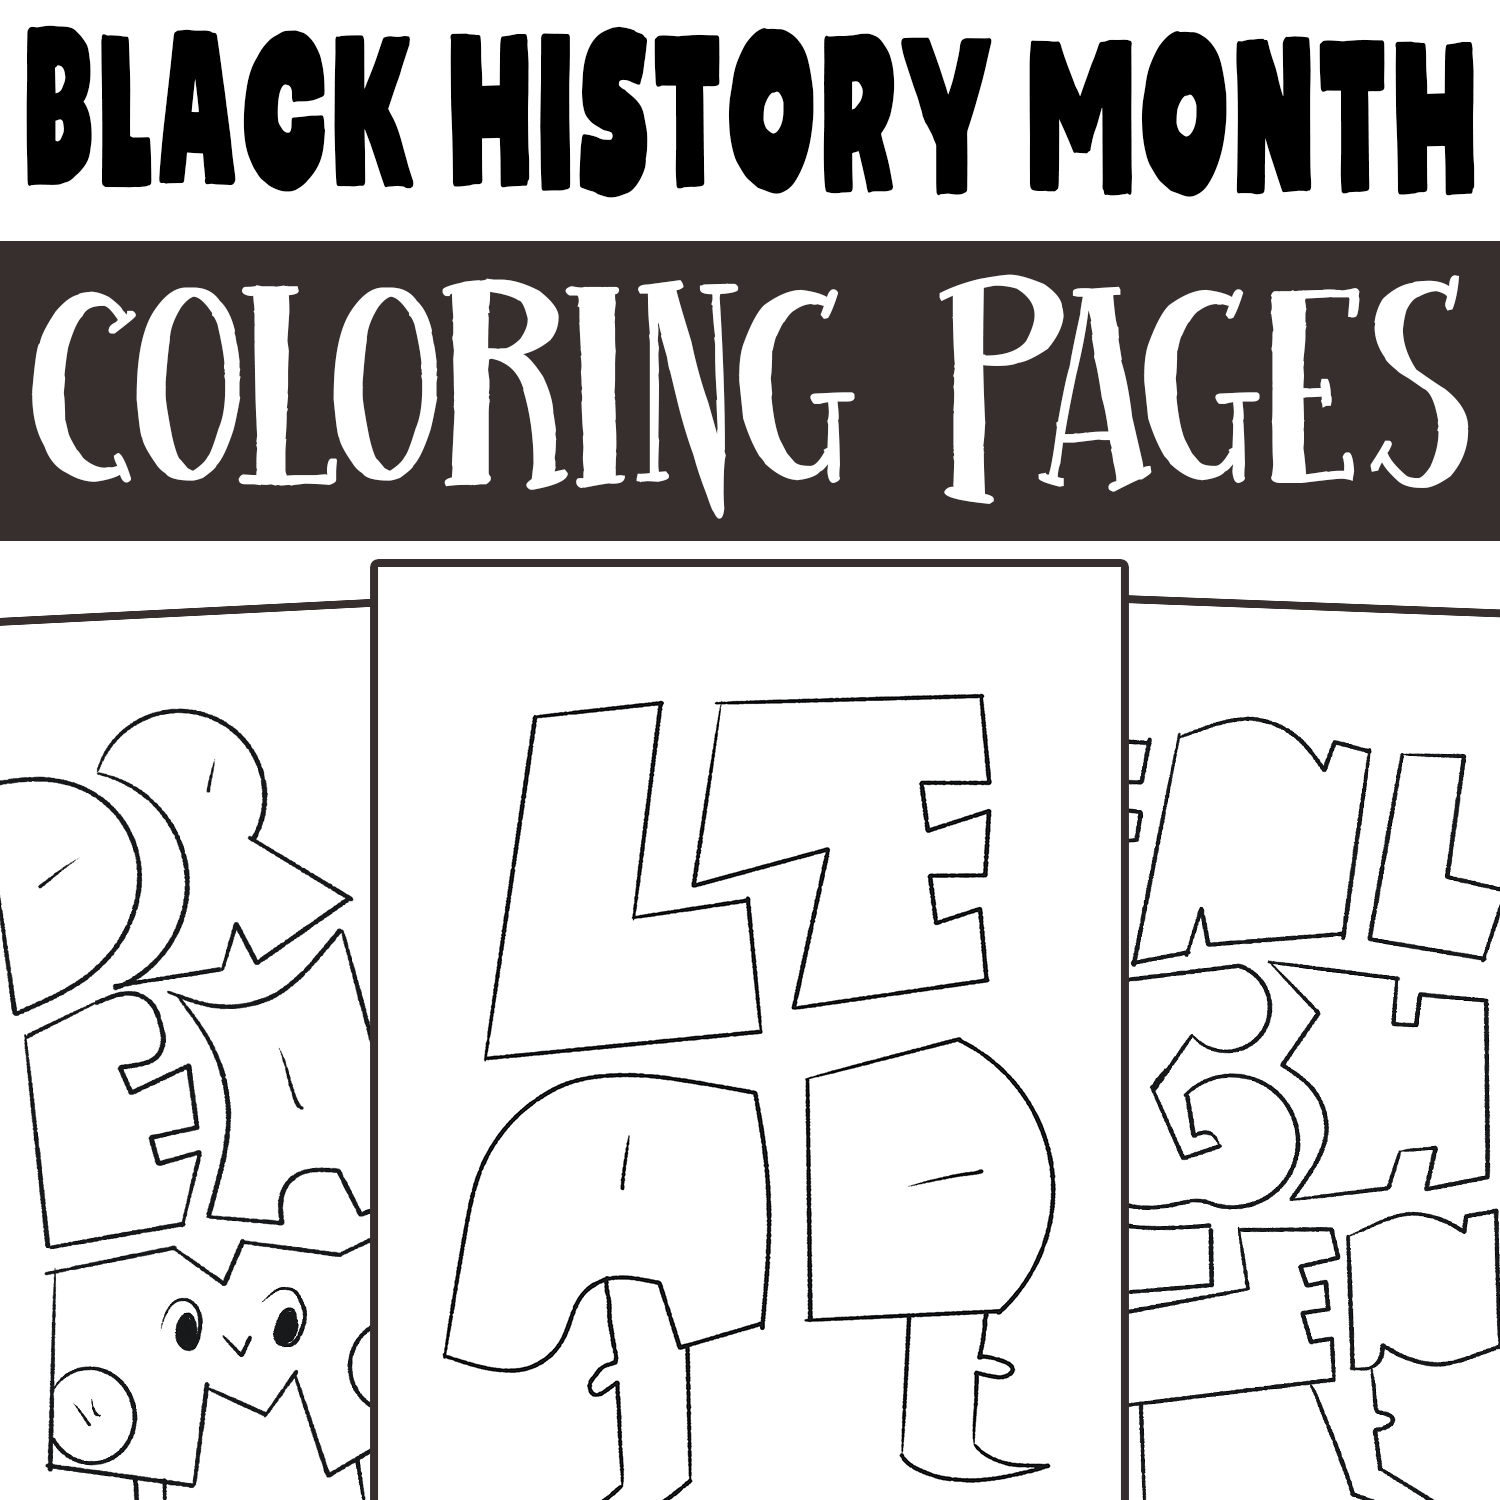 Black history month coloring pages african history coloring worksheets made by teachers